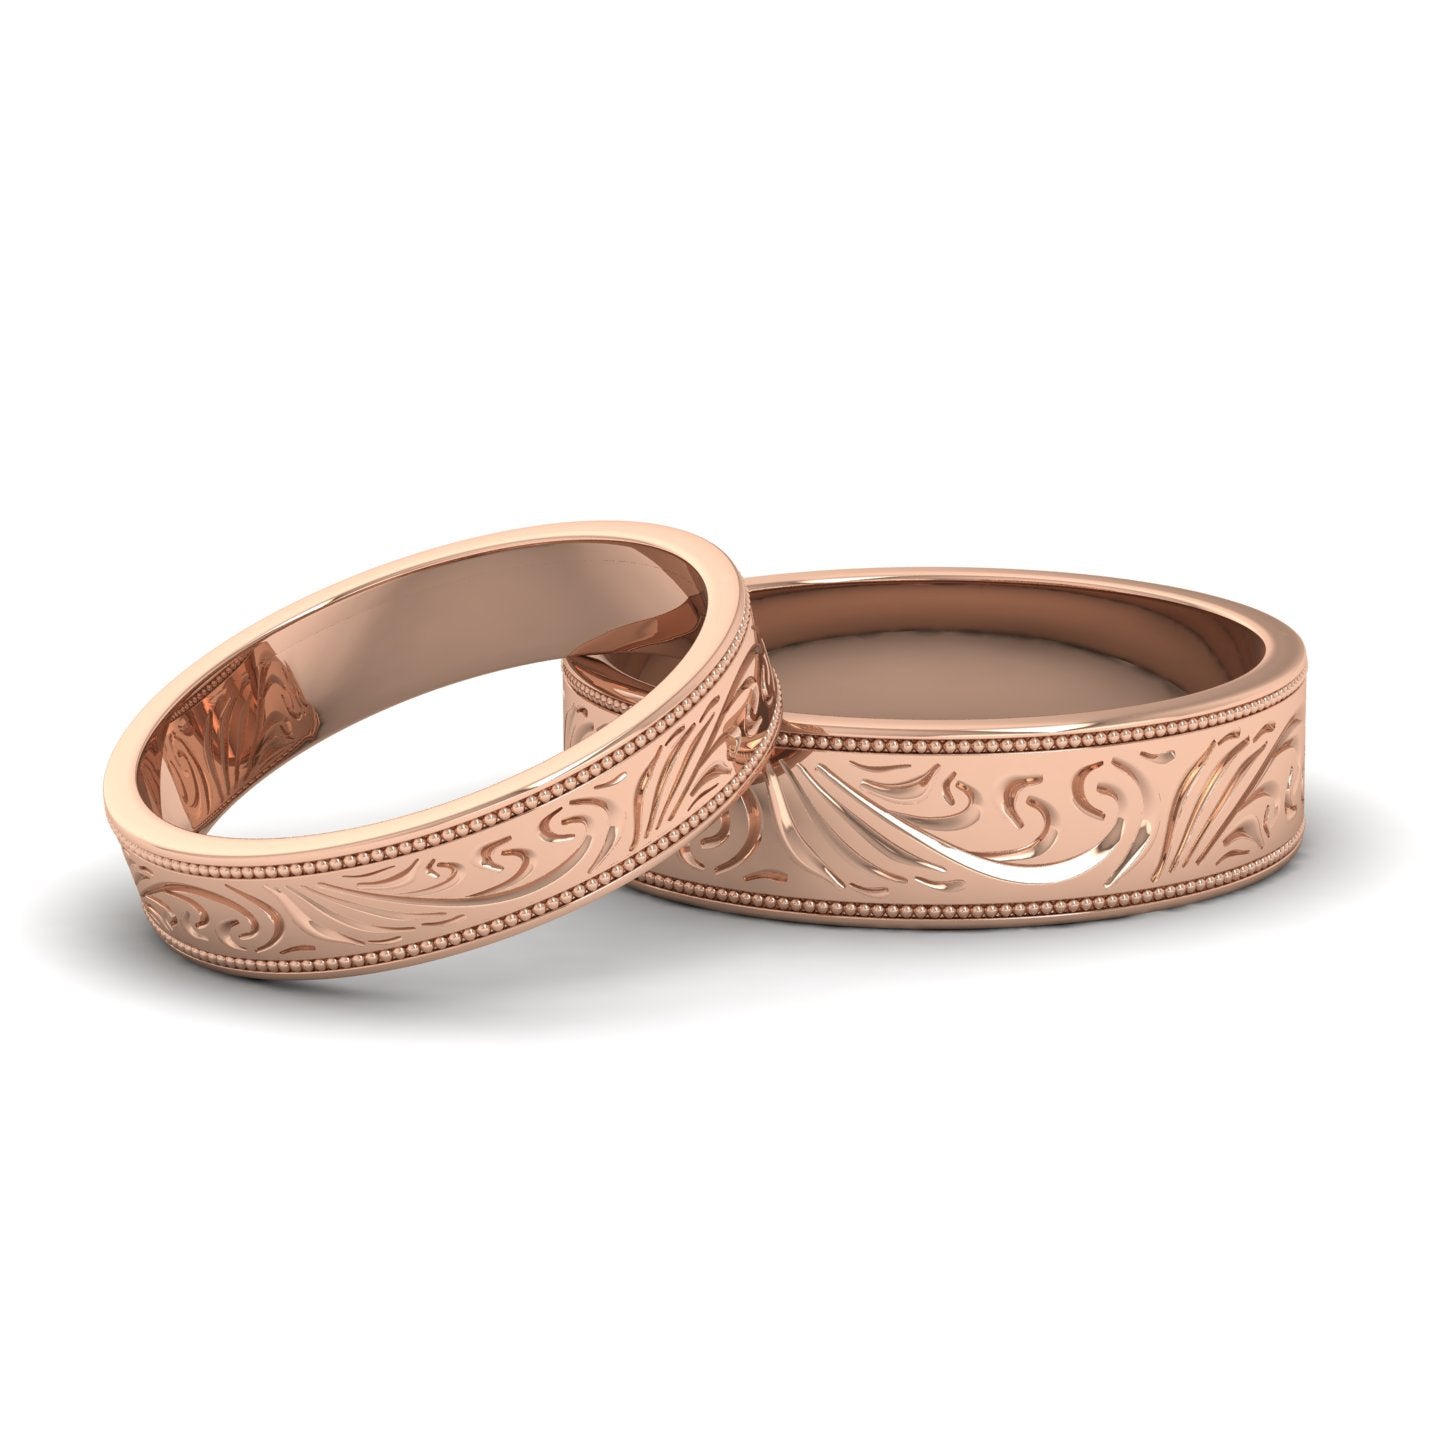 Engraved 18ct Rose Gold 6mm Flat Wedding Ring With Millgrain Edge